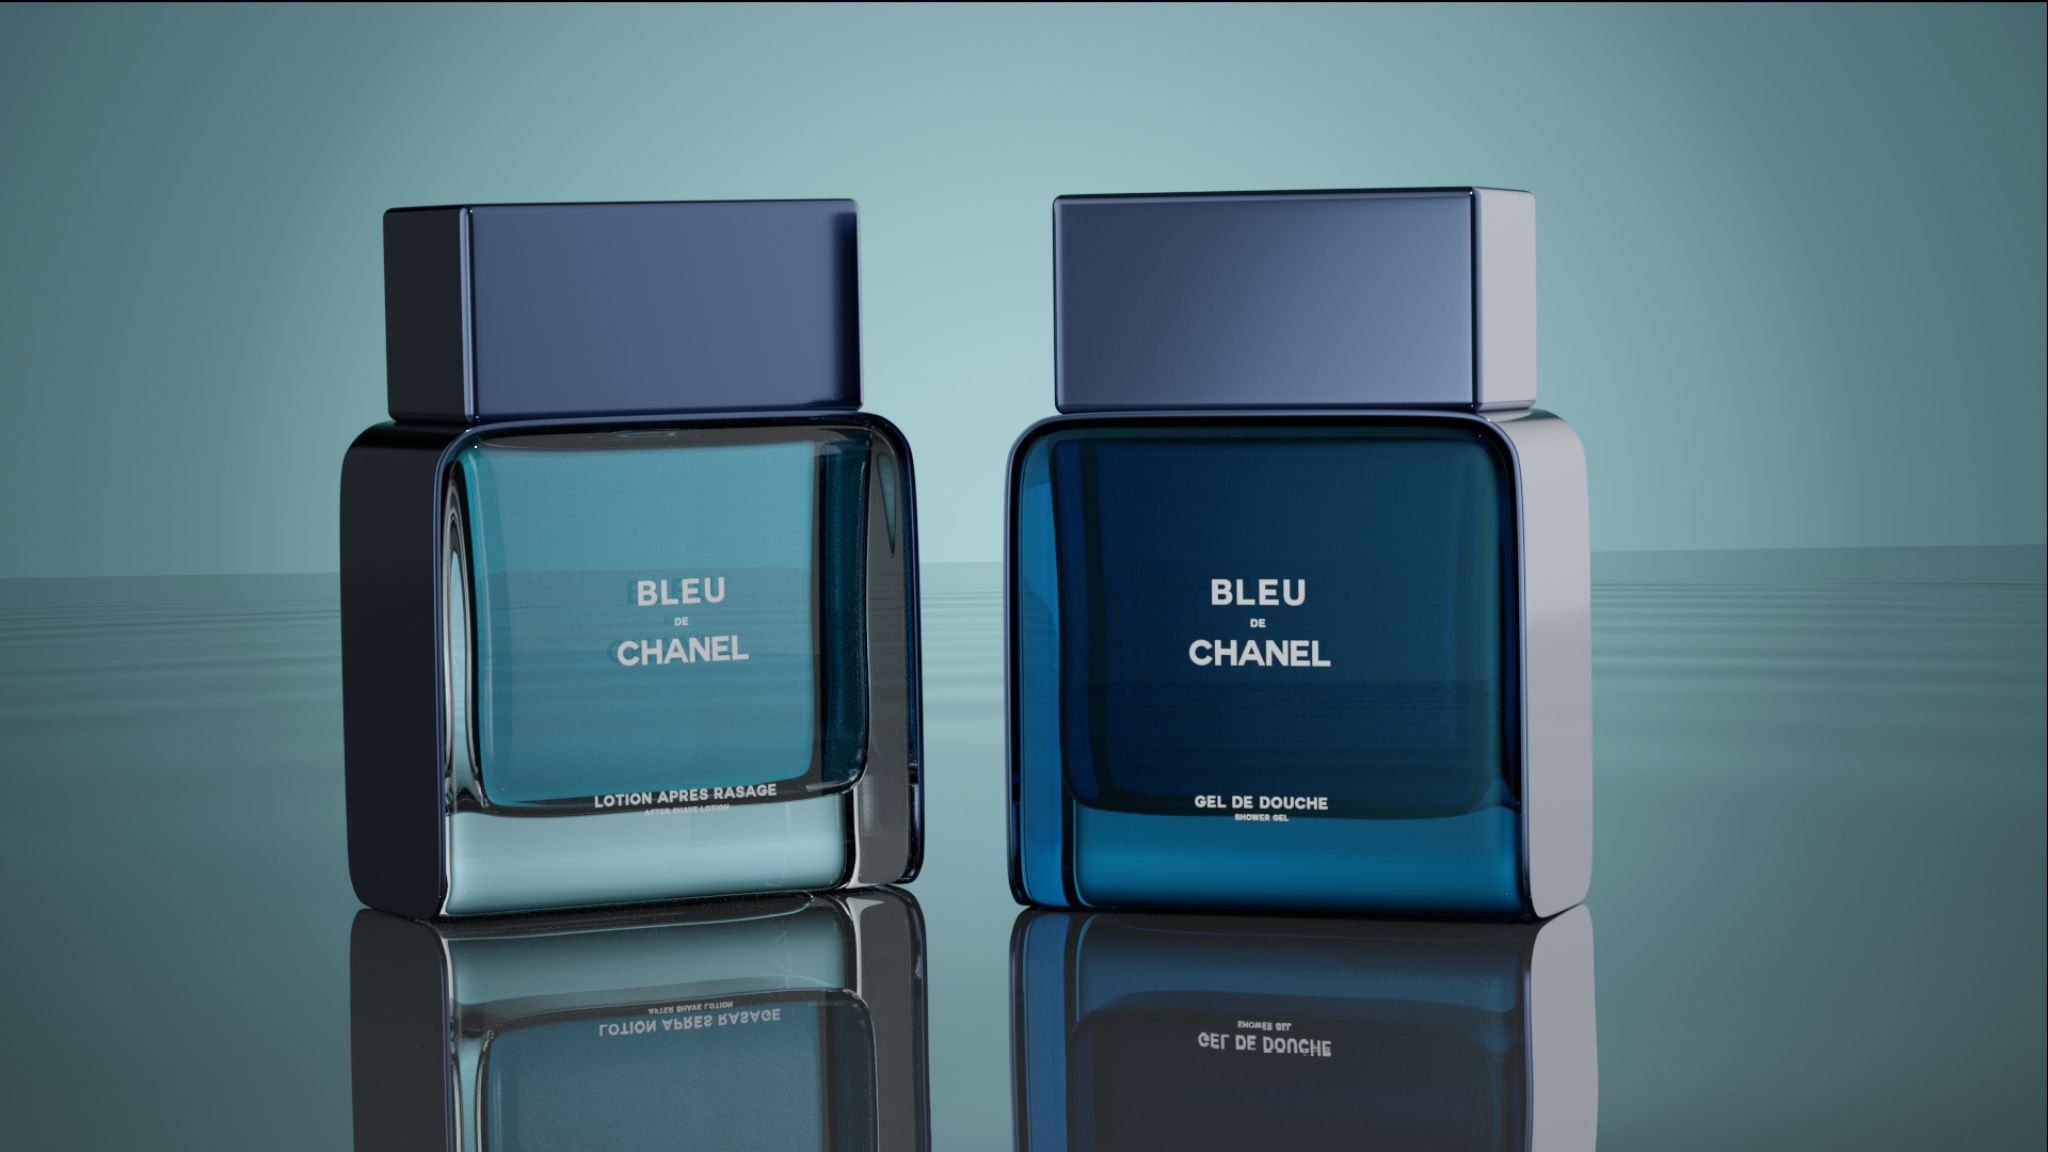 Tips for Animating Your Promotional Video Two Bleu De Chanel bottles on display